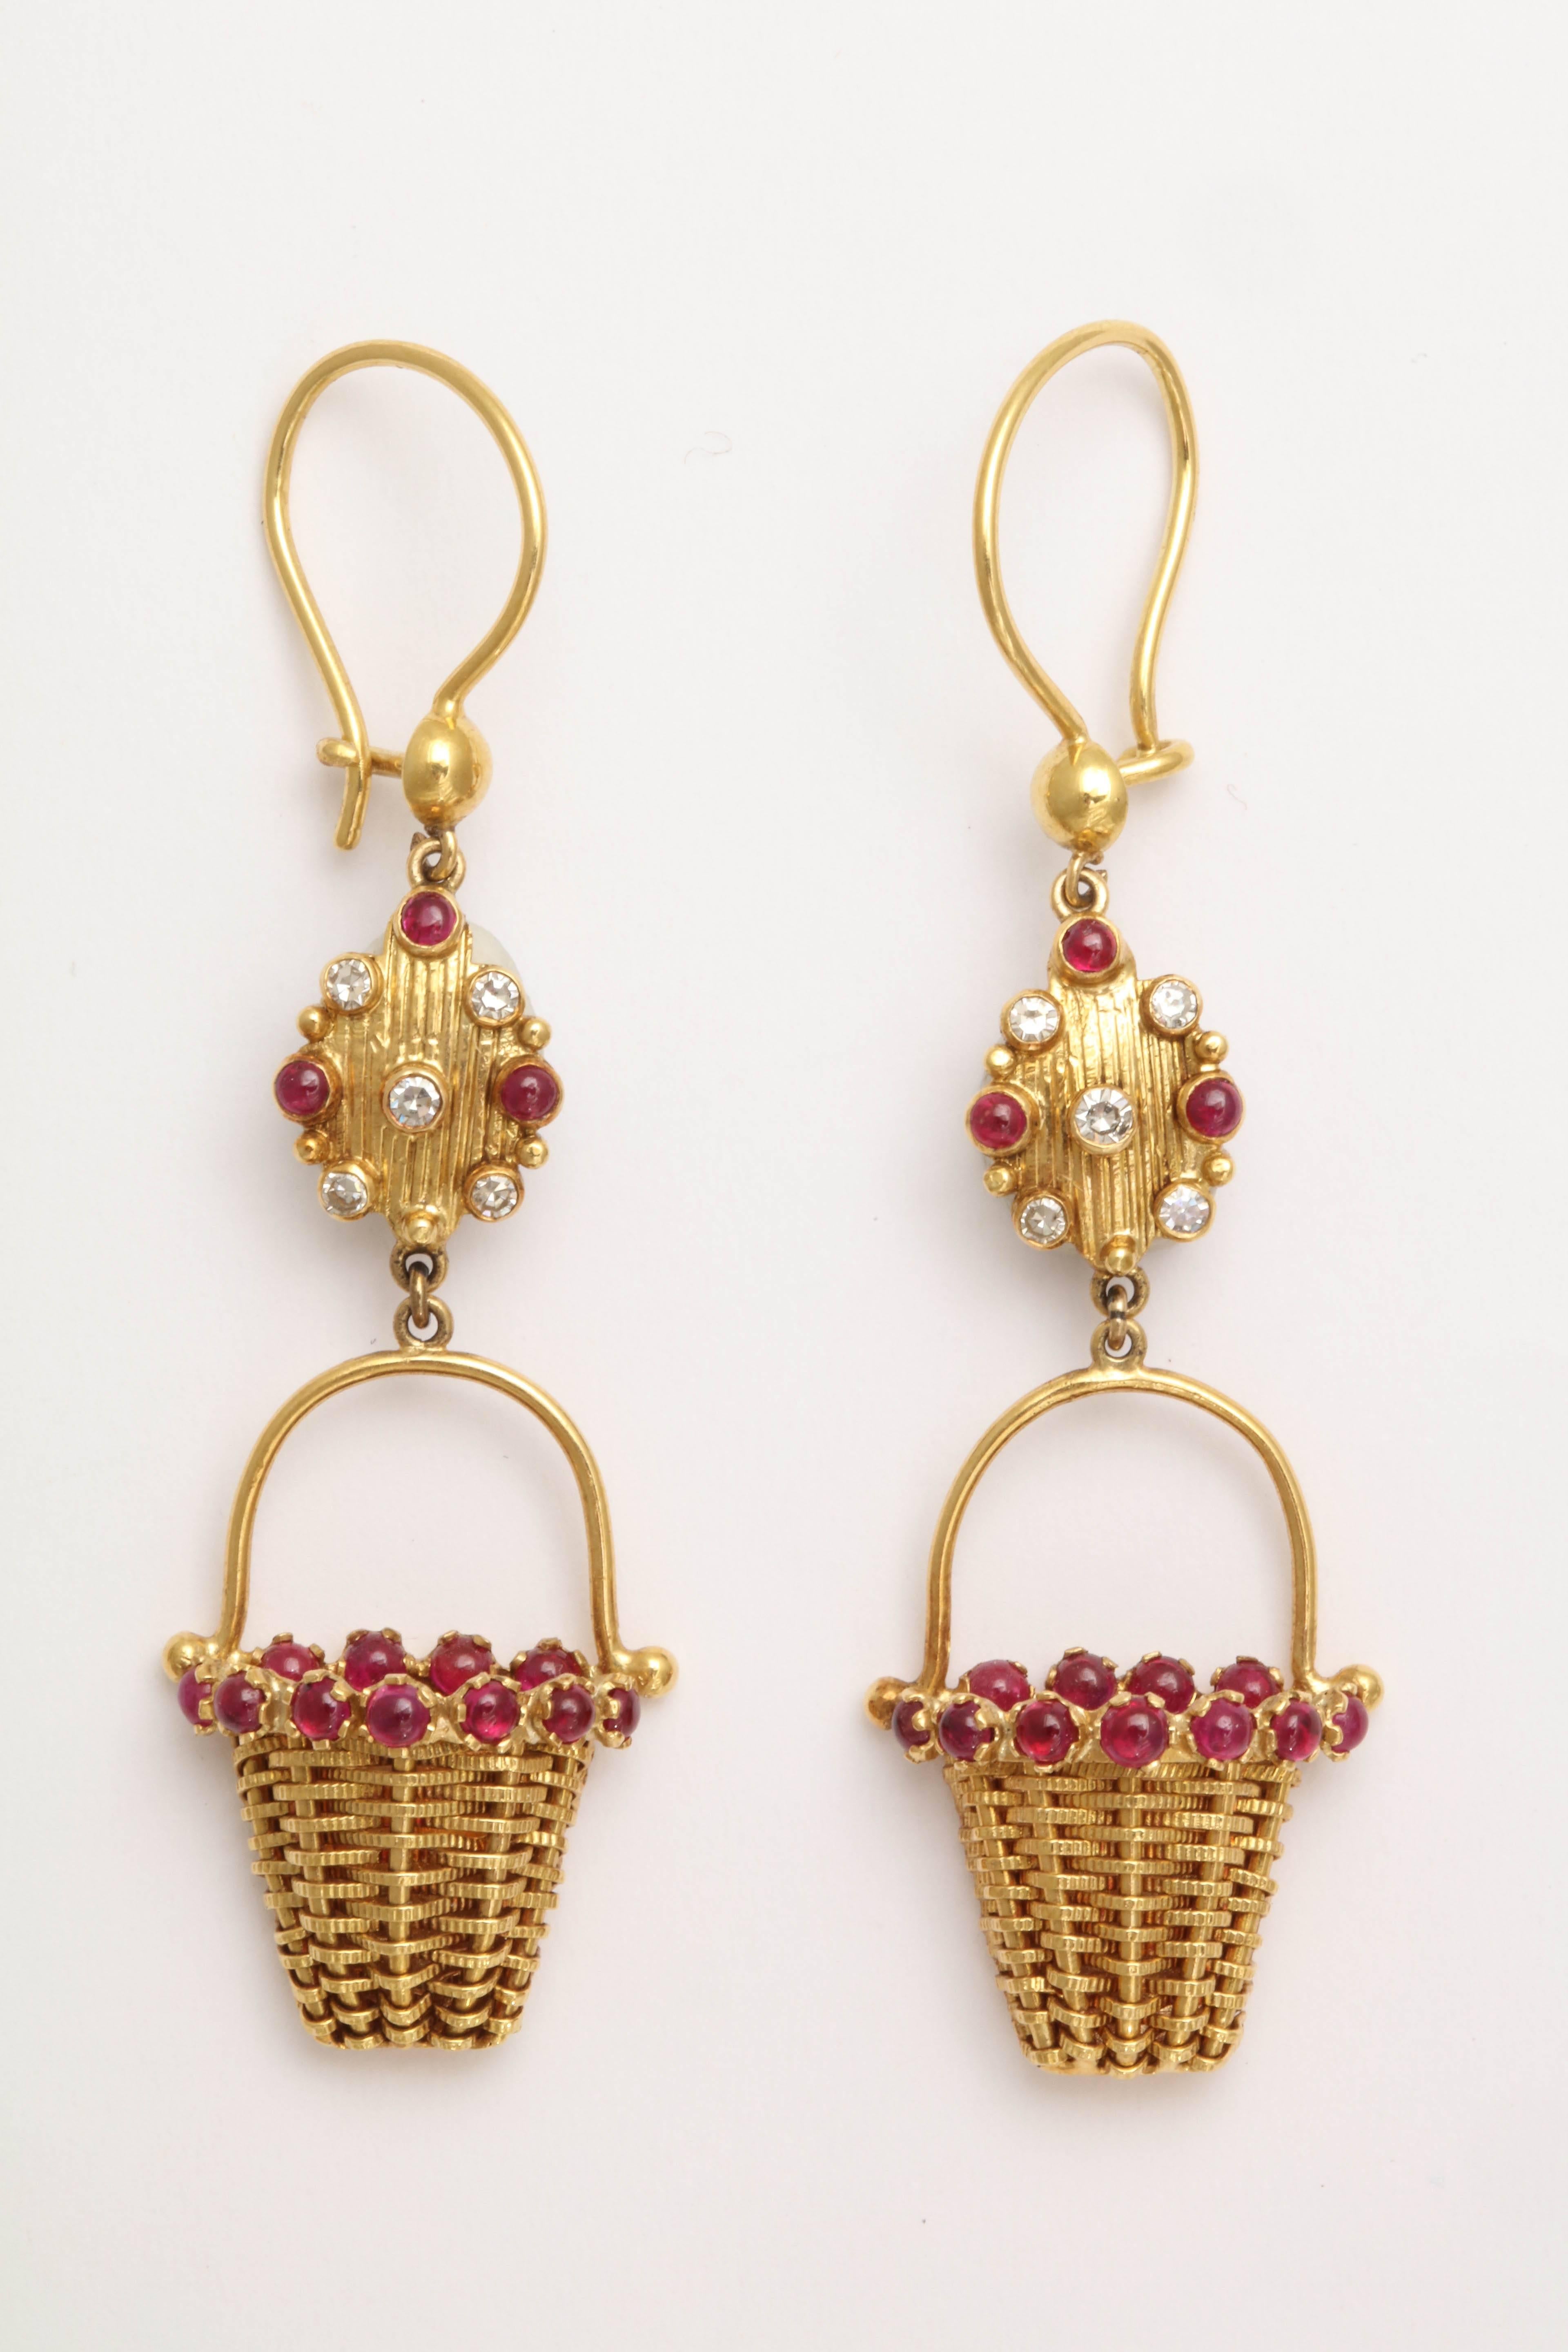 These are hand woven baskets in a textured 18 kt gold wire. The top is surrounded with beautiful ruby cabochons. The engraved link between the basket and the ear wire is decorated  with ruby cabochons and faceted diamonds. The ear wire has a safety